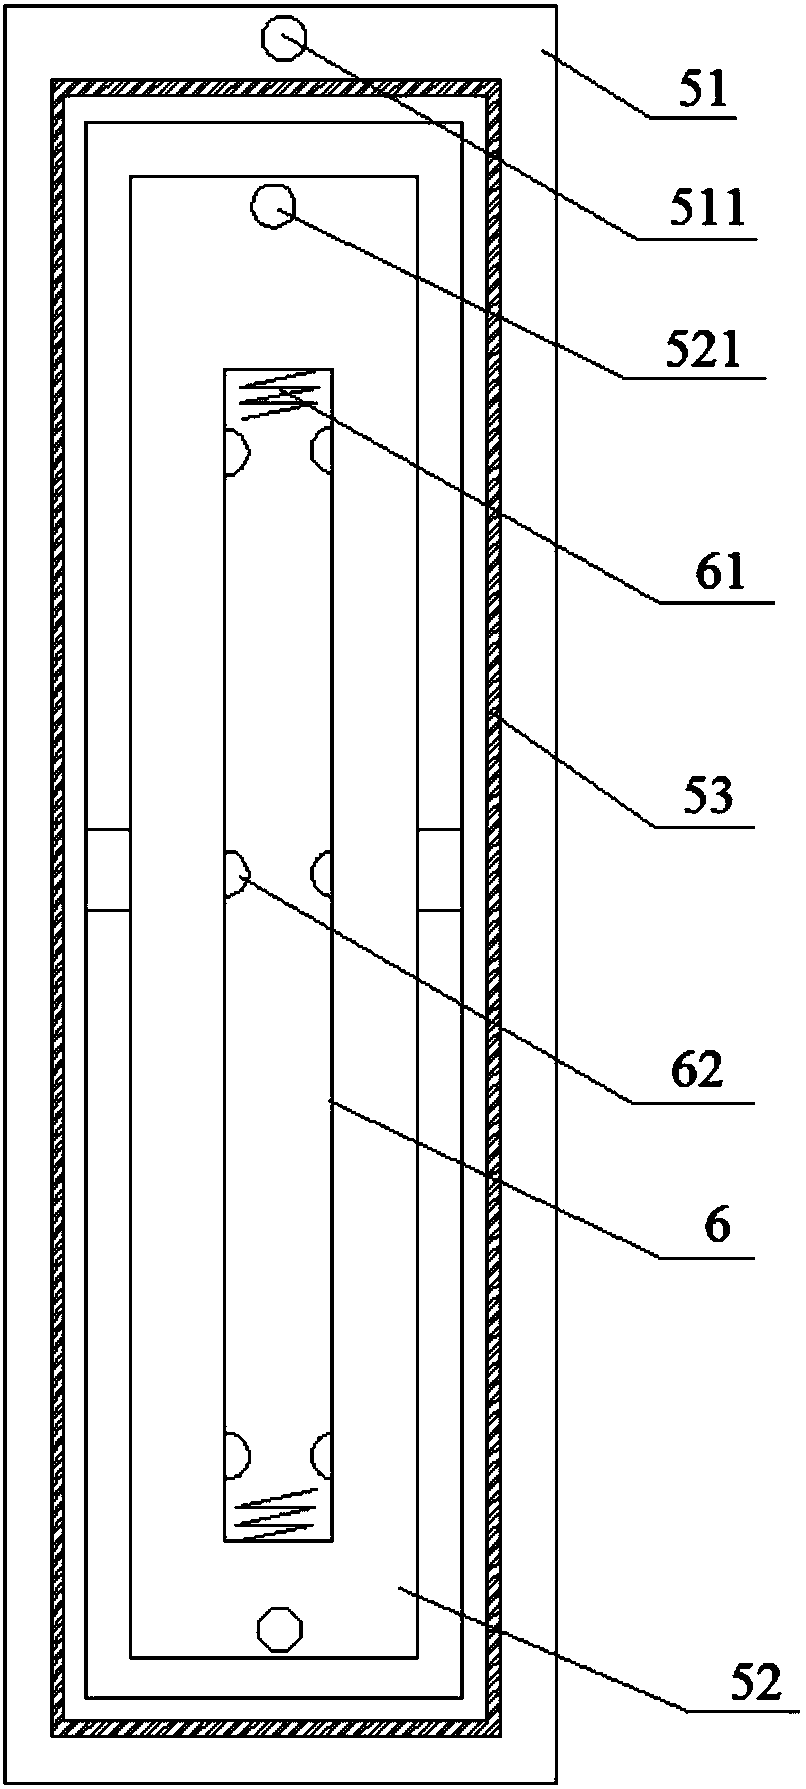 Anti-attenuation aging detection apparatus for luminescent materials